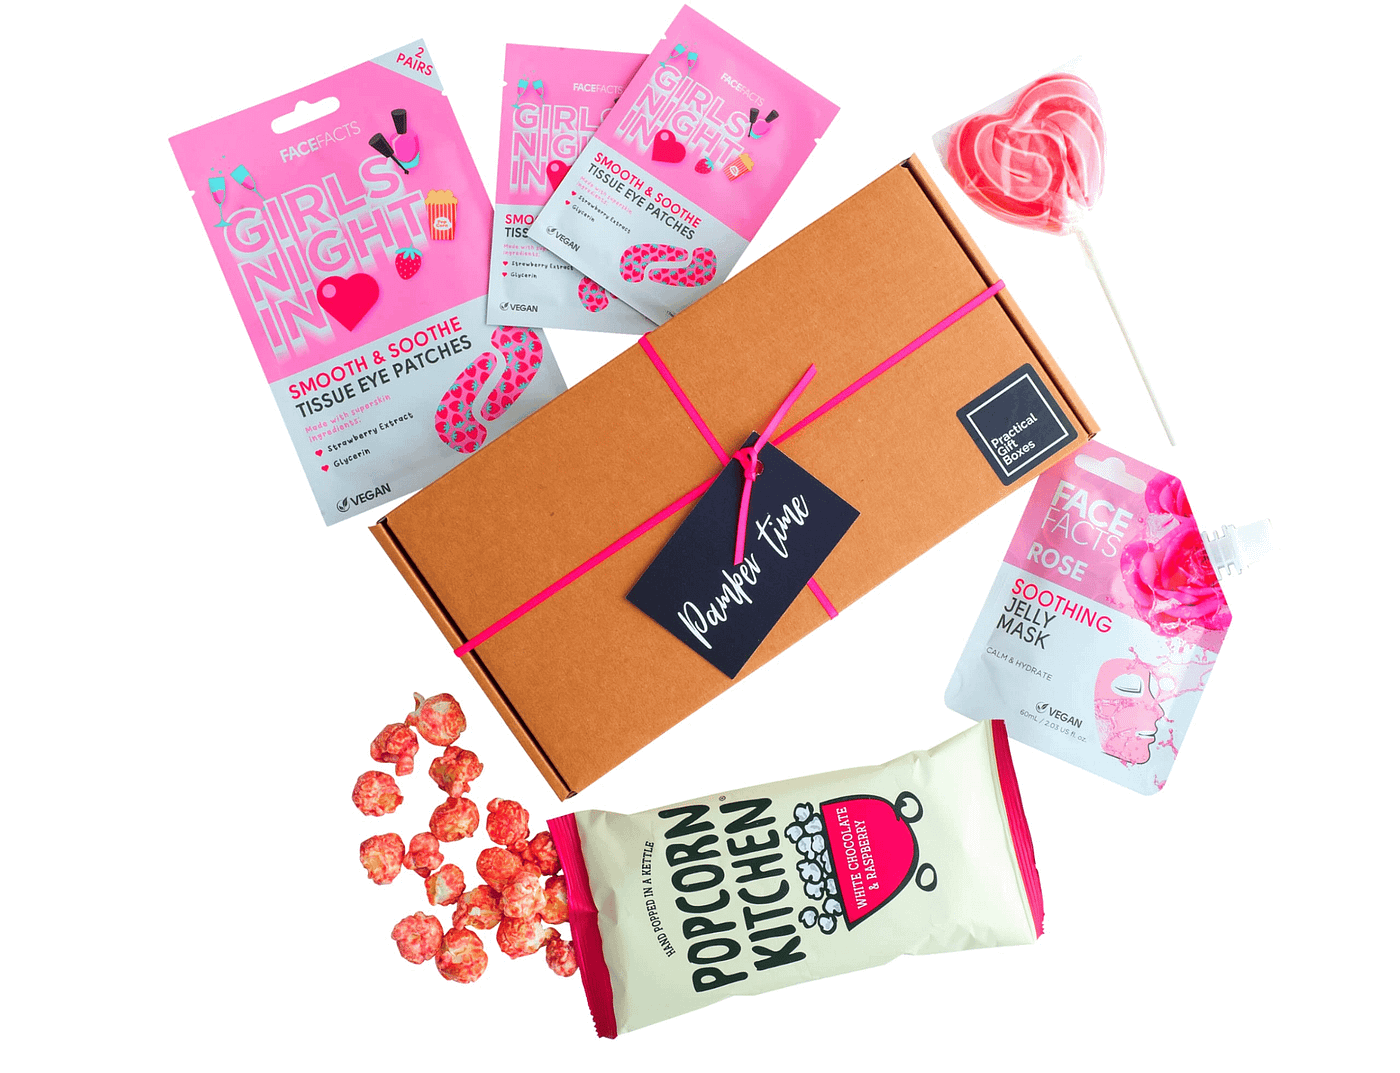 Gift Boxes for Girls That Capture Hearts, by Ellie Pritchard